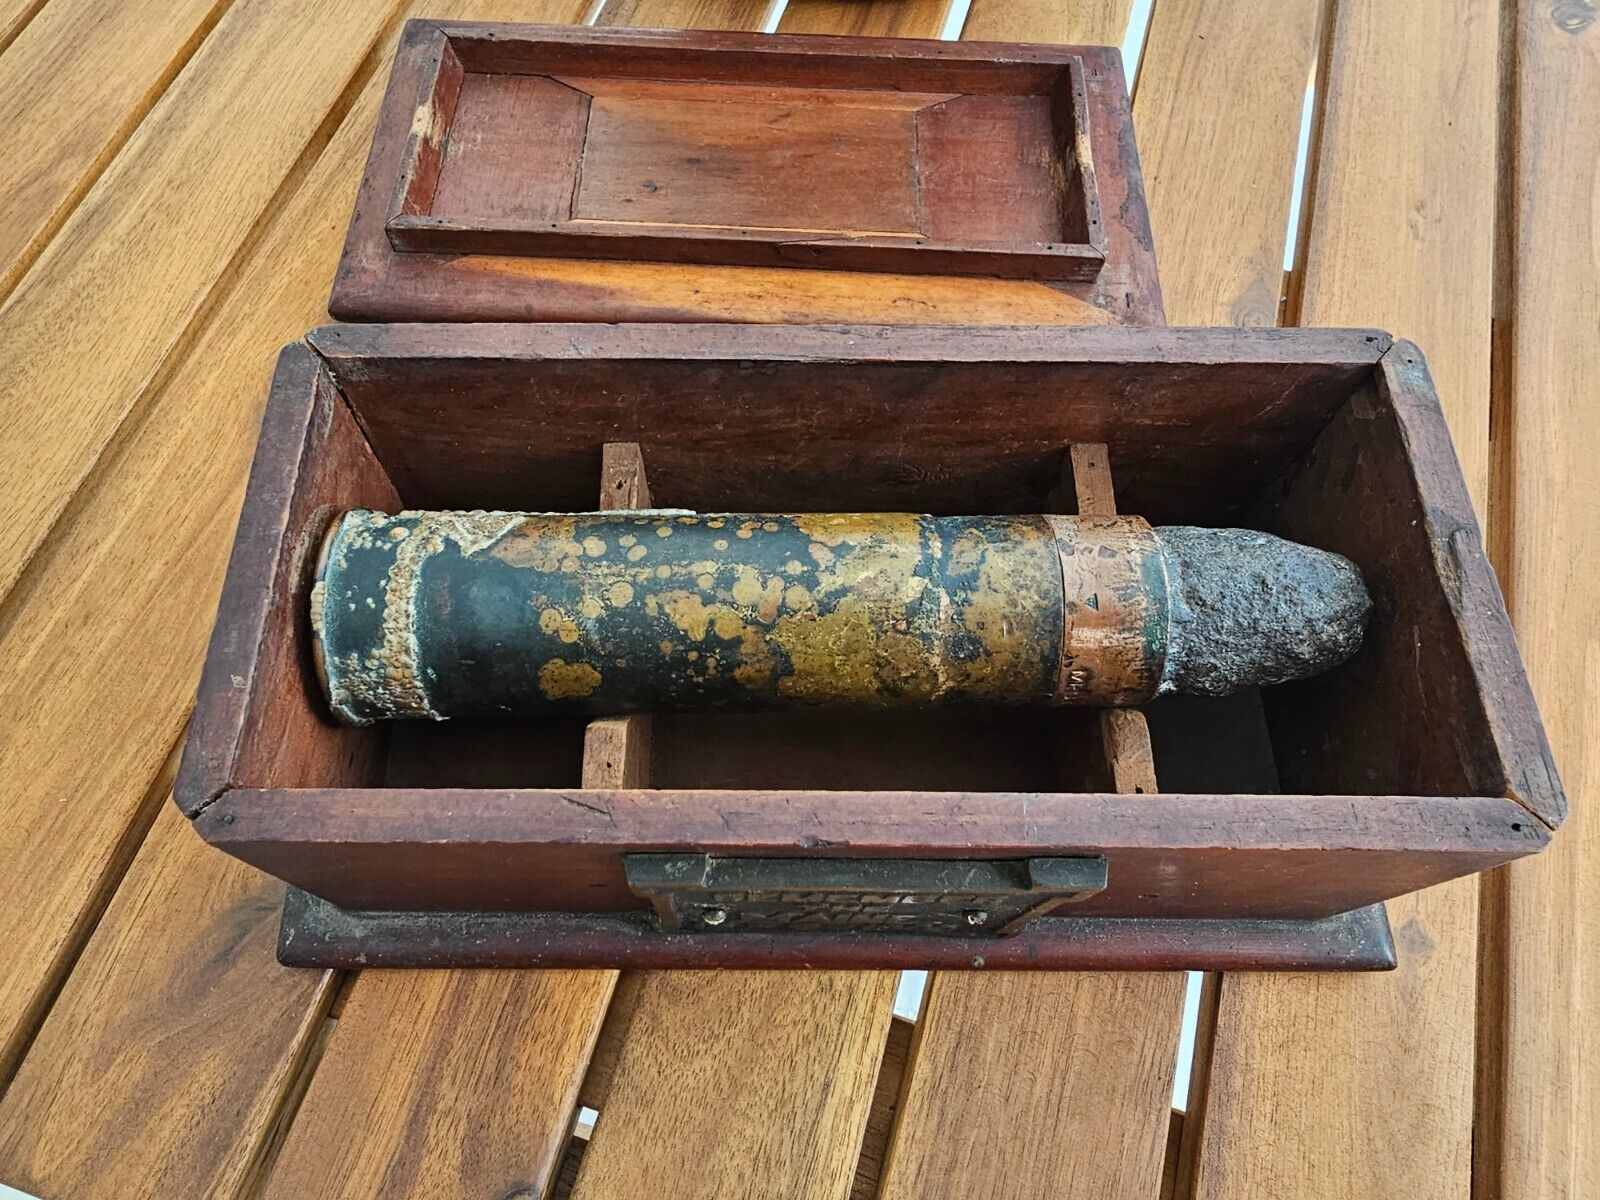 UNIQUE USS MAINE WRECK WINCHESTER BULLET SPANISH AMERICAN WAR HISTORY PIECE 1898